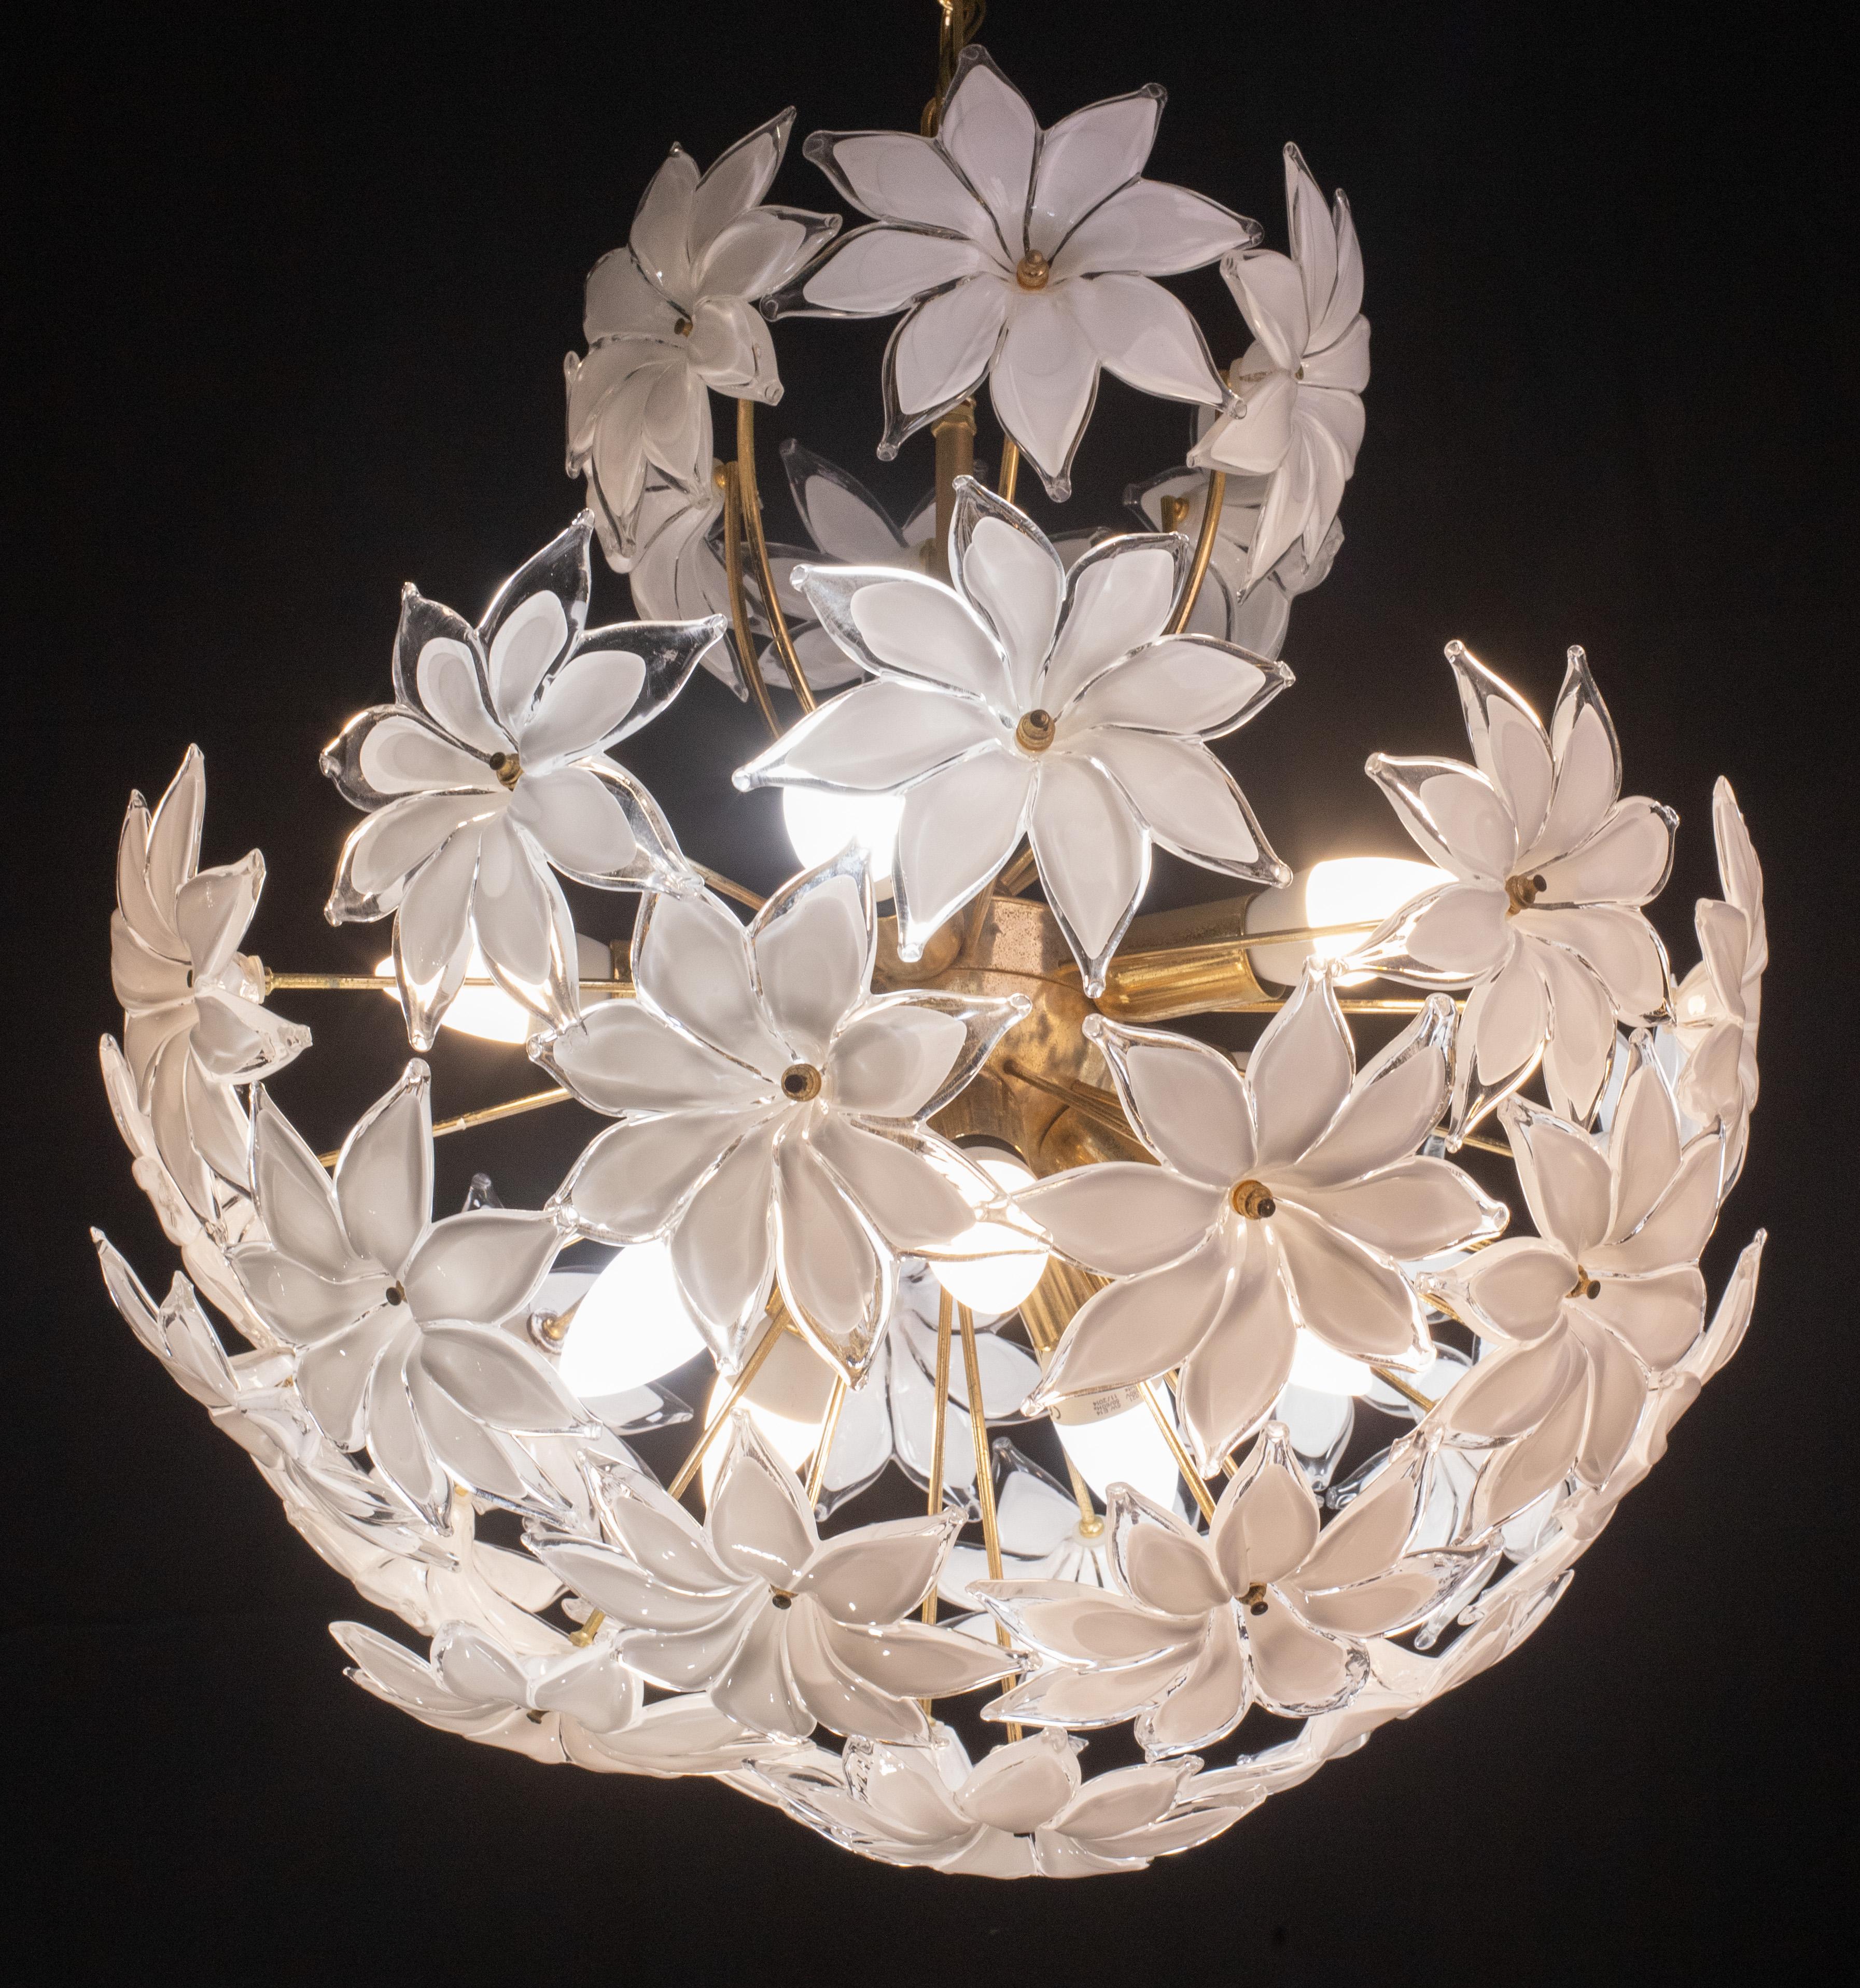 Vintage Murano glass chandelier with glass flowers.
Gold bath frame, some small signs of time that gives authenticity and charm.
The chandelier has 10 light points with E14 socket.
The height of the chandelier is 110 cm, 65 cm without chain, the